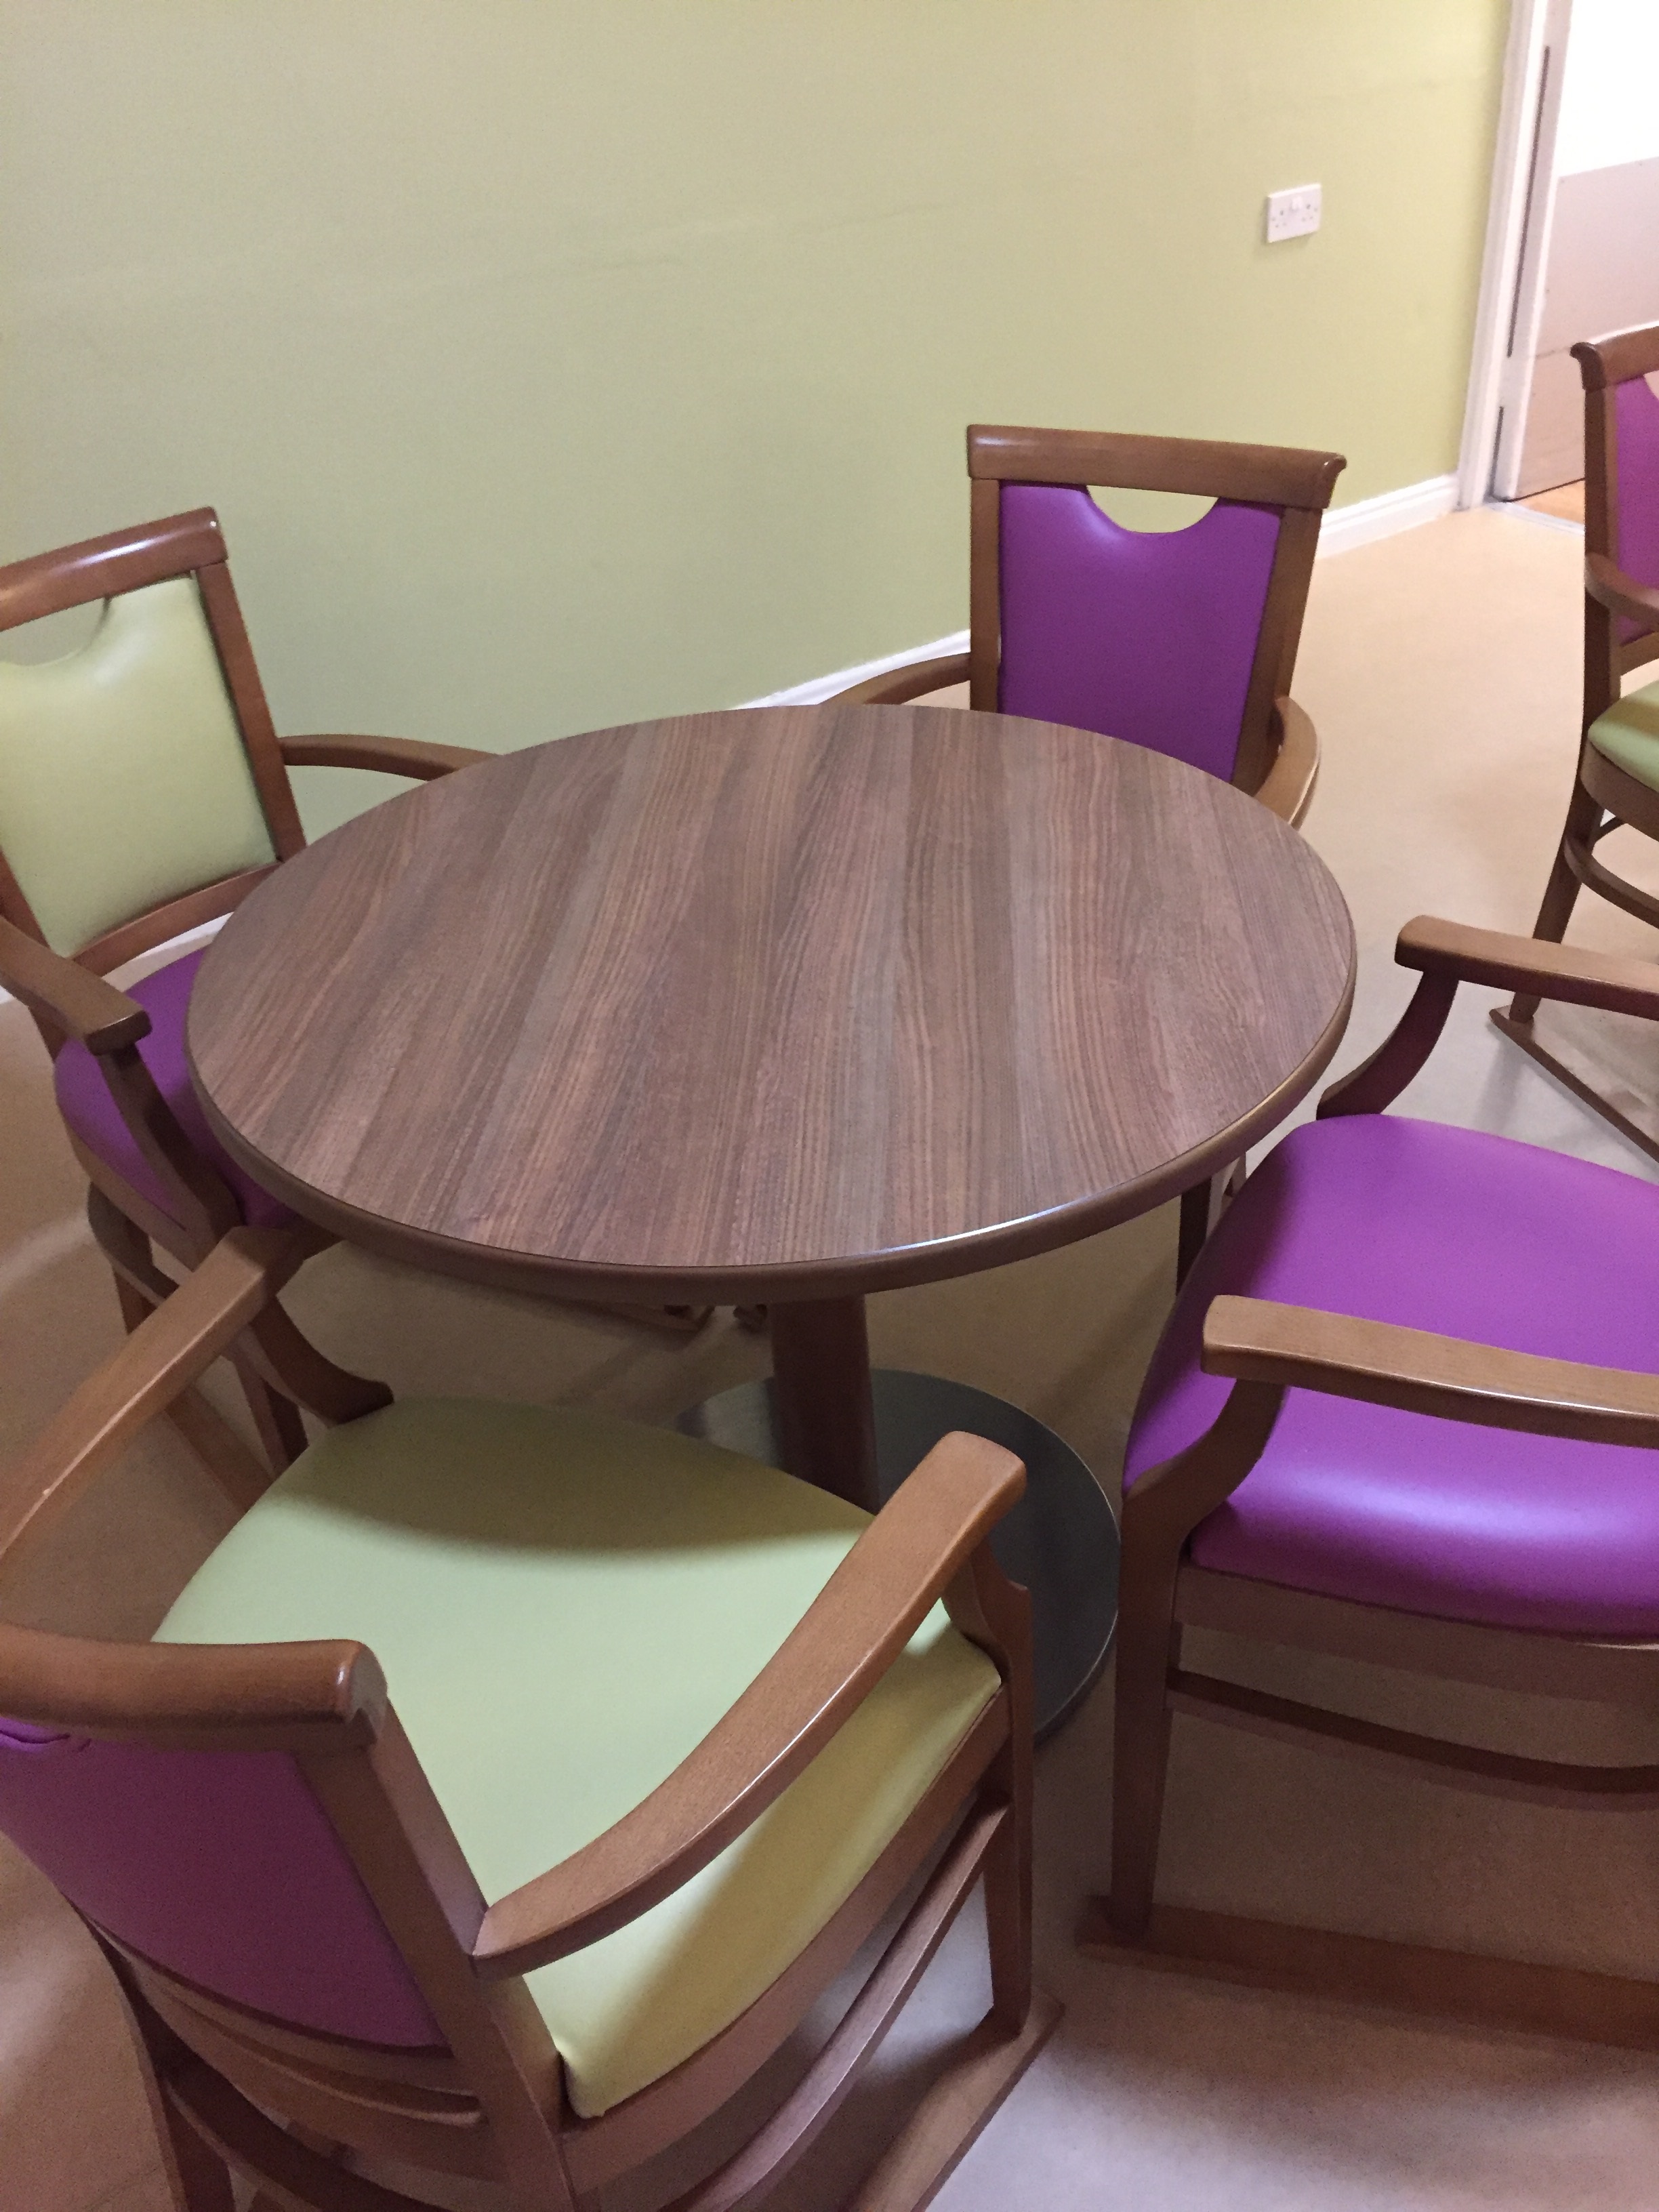 Refurbished Nursing Unit Dining Room : Key Healthcare is dedicated to caring for elderly residents in safe. We have multiple dementia care homes including our care home middlesbrough, our care home St. Helen and care home saltburn. We excel in monitoring and improving care levels.